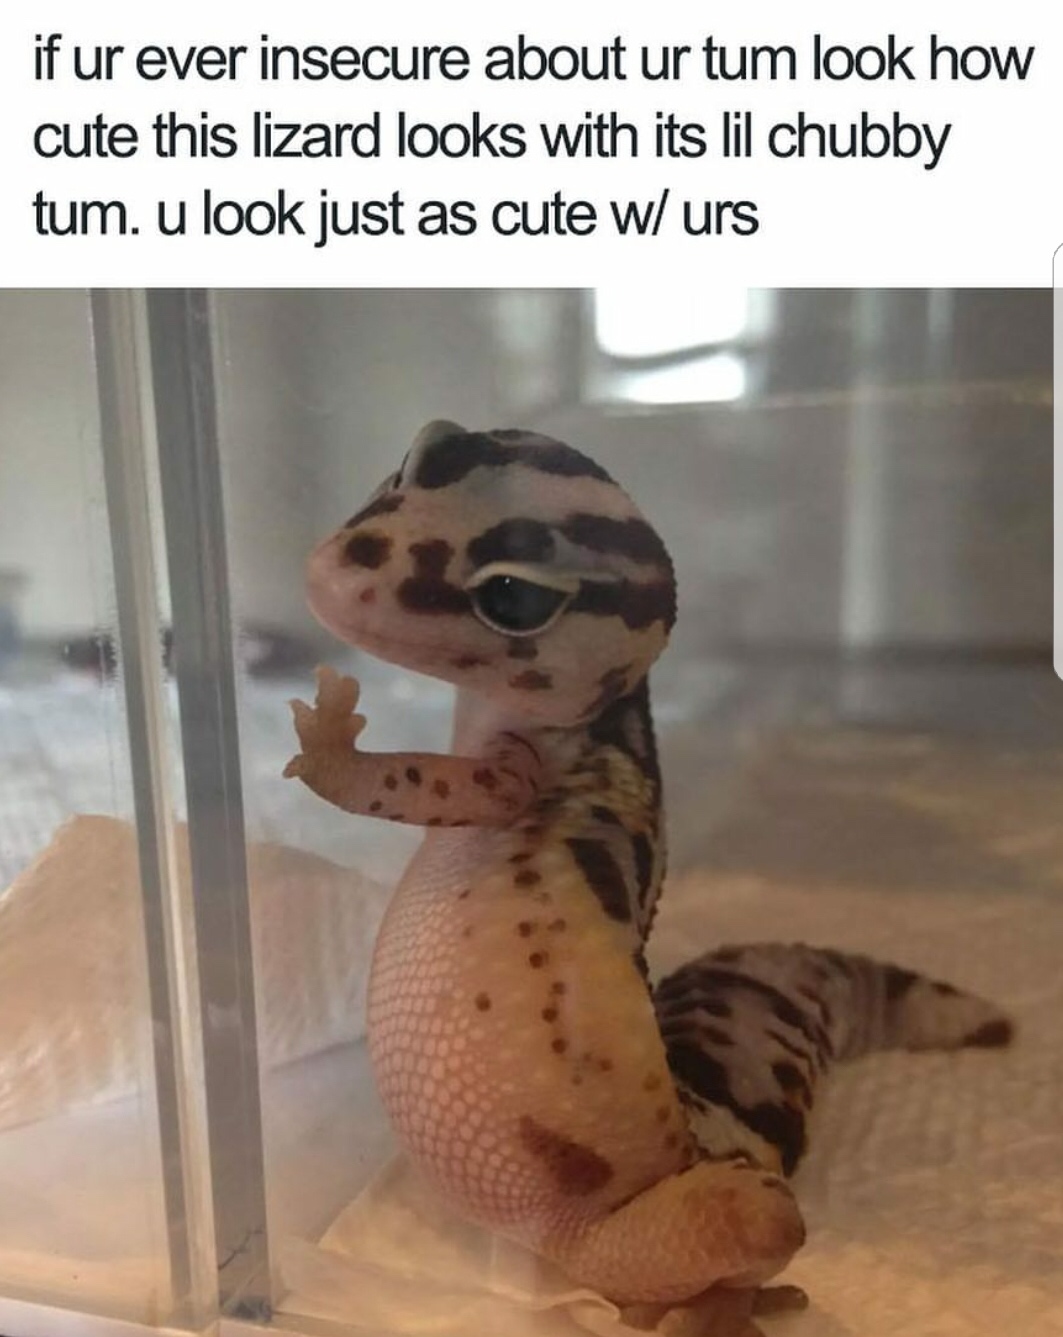 wholesome memes - if ur ever insecure about ur tum look how cute this lizard looks with its lil chubby tum. u look just as cute w urs